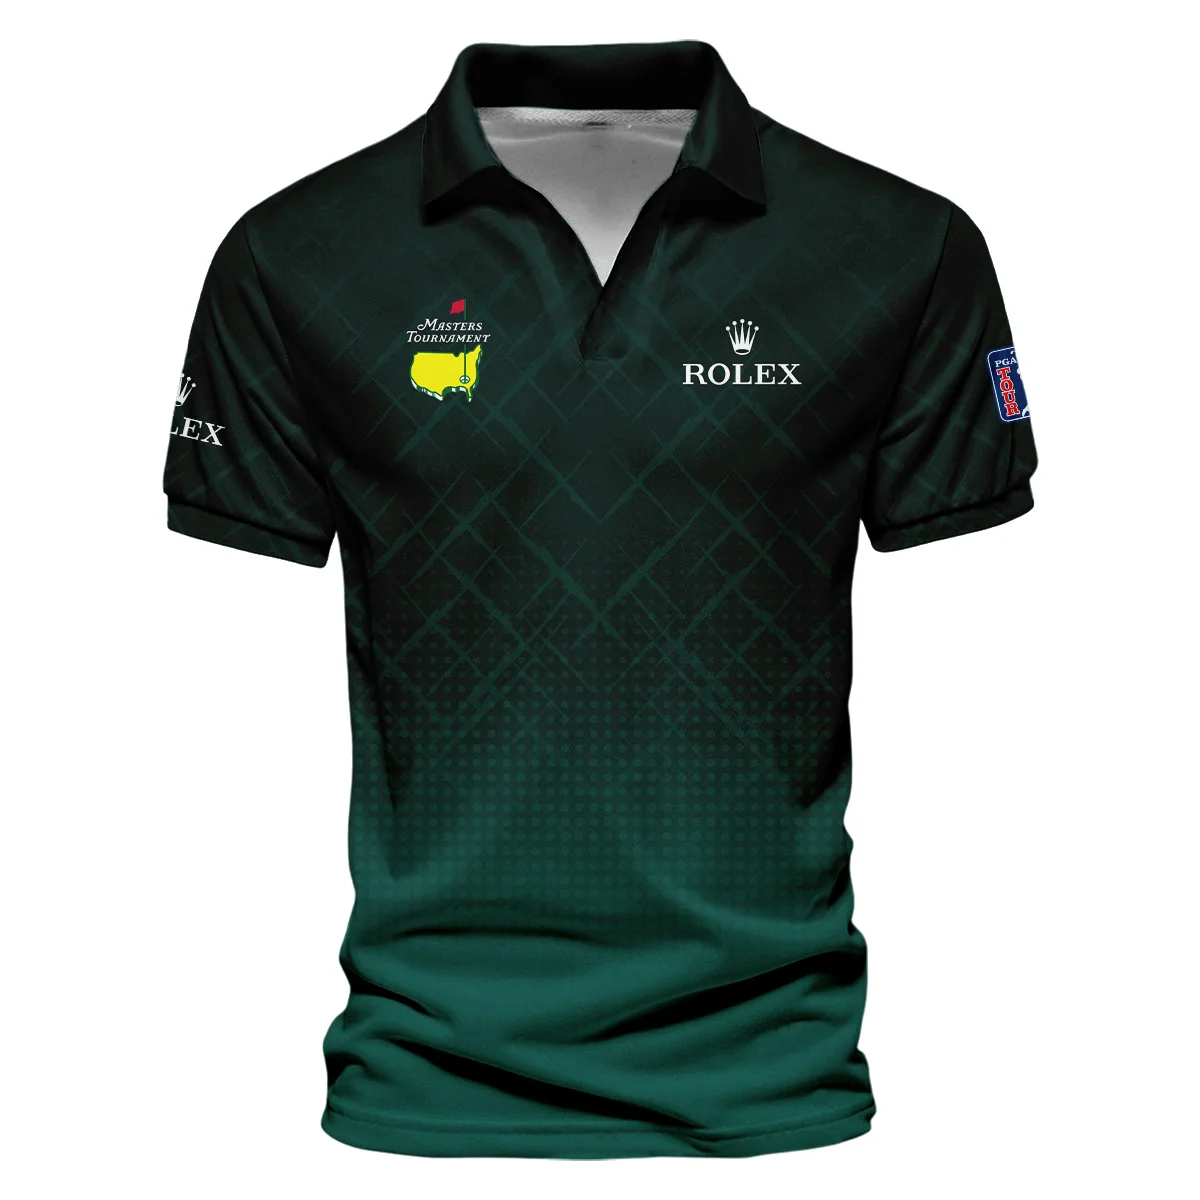 Rolex Masters Tournament Sport Jersey Pattern Dark Green Vneck Polo Shirt Style Classic Polo Shirt For Men